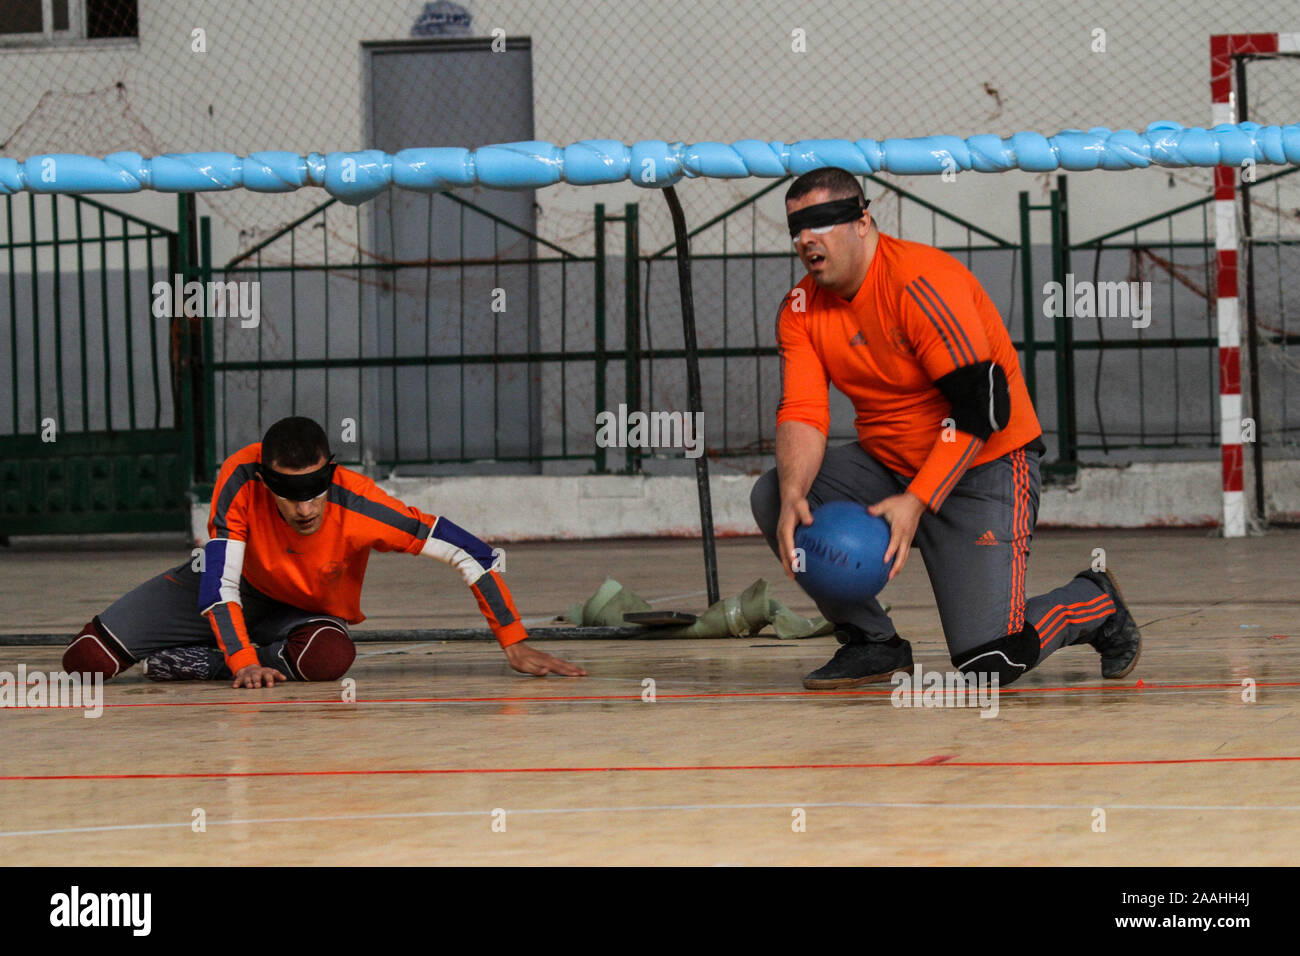 November 21, 2019: Gaza, Palestine. 21 November 2019. Palestinian Federation of goalball opens Gaza's Goalball championship in the Saed Sayel Sports Hall in Gaza City. The tournament, which is designed for visually impaired  athletes, it is the first one taking place in the Gaza Strip. In the game, players try to throw a ball with bells into the opponents' goal, by hand. (Credit Image: © Ahmad Hasaballah/IMAGESLIVE via ZUMA Wire) Stock Photo